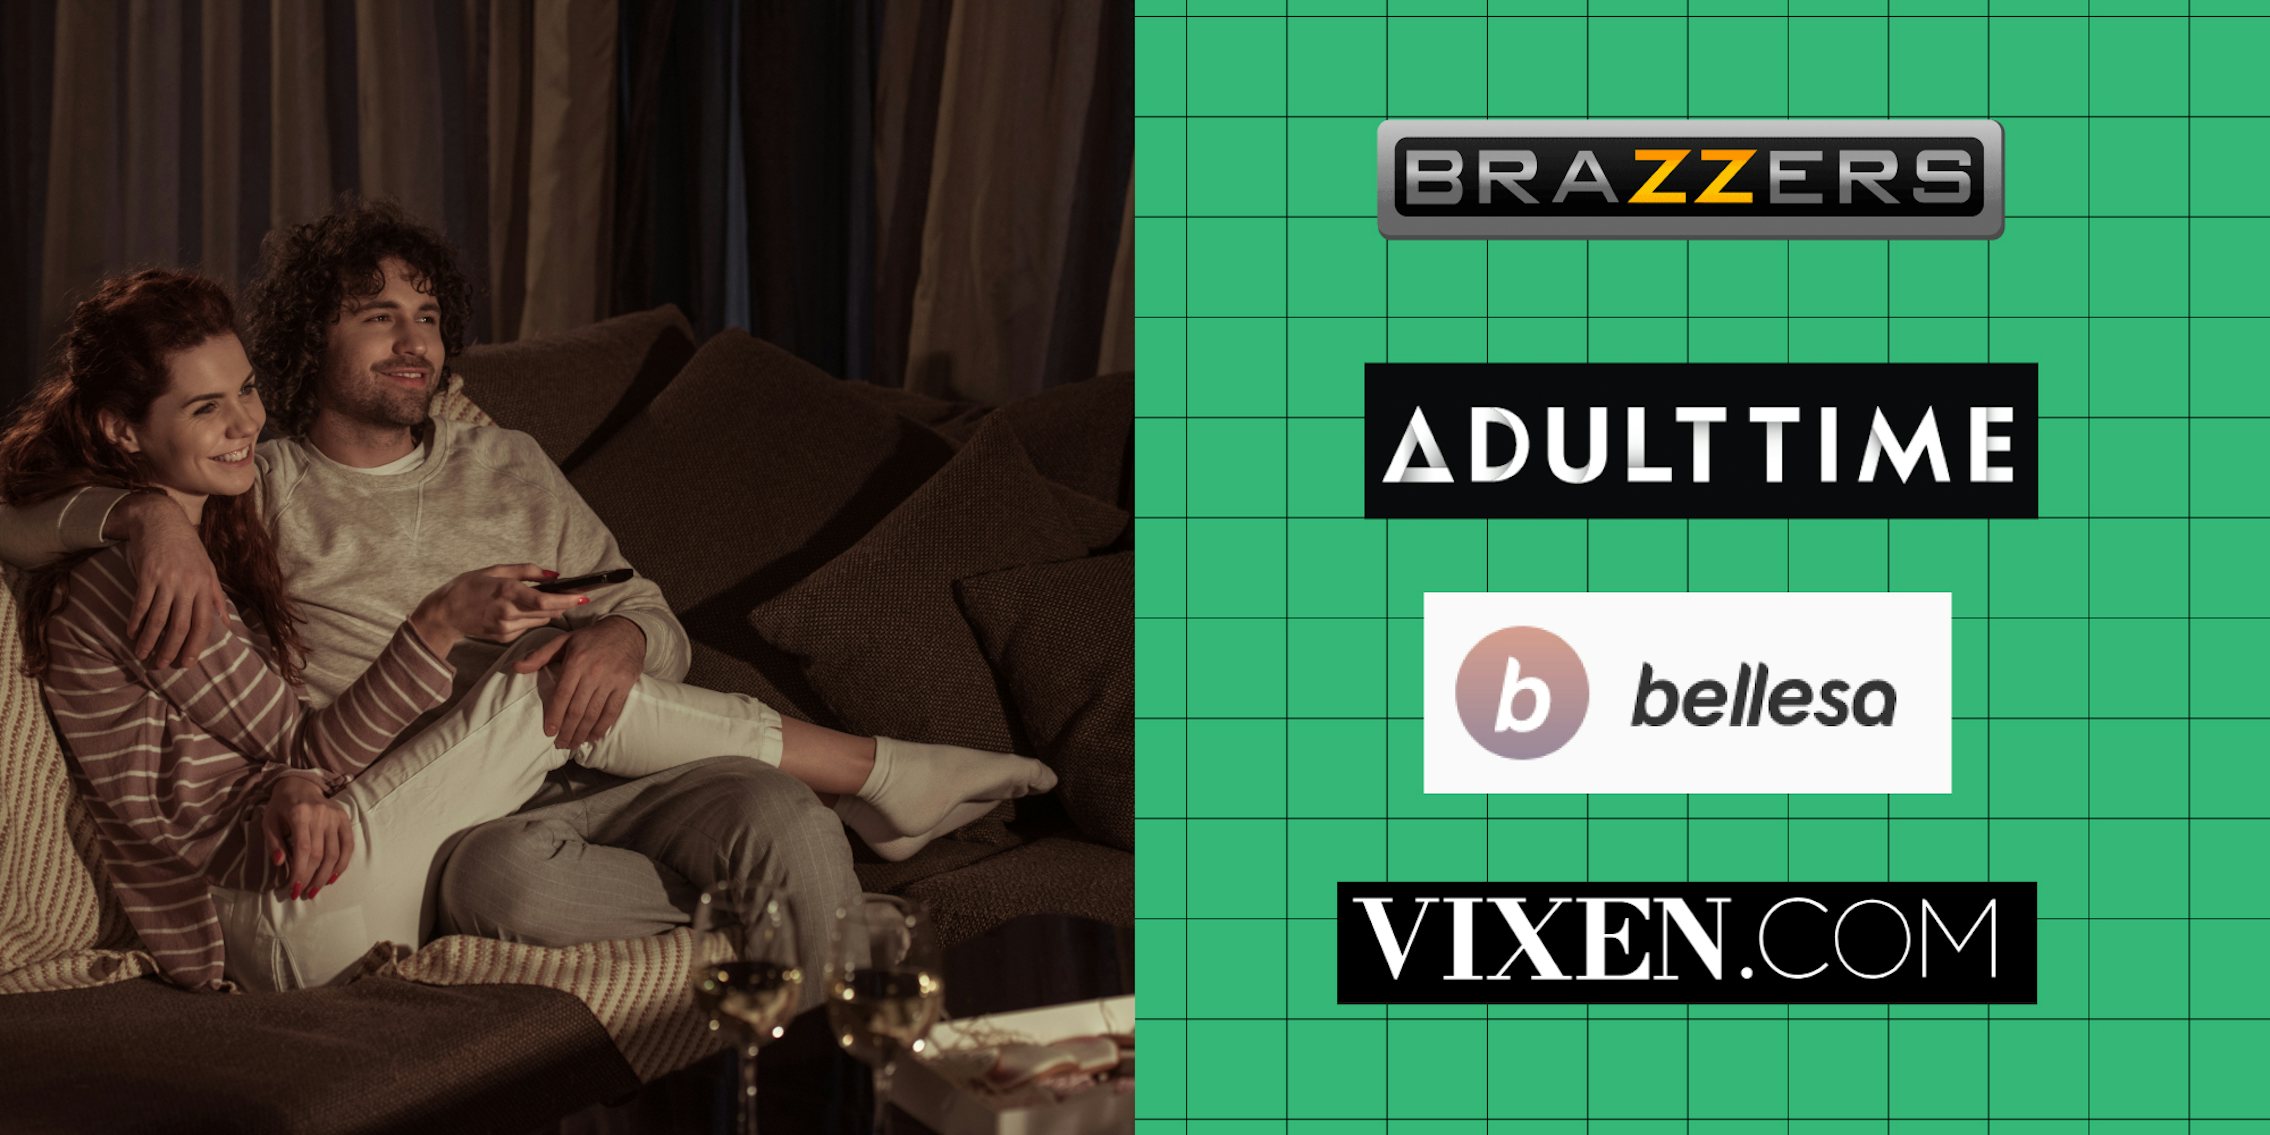 valentines day porn featured image featuring a couple sitting on a sofa looking at porn options from brazzars, adult time, bellesa, and vixen